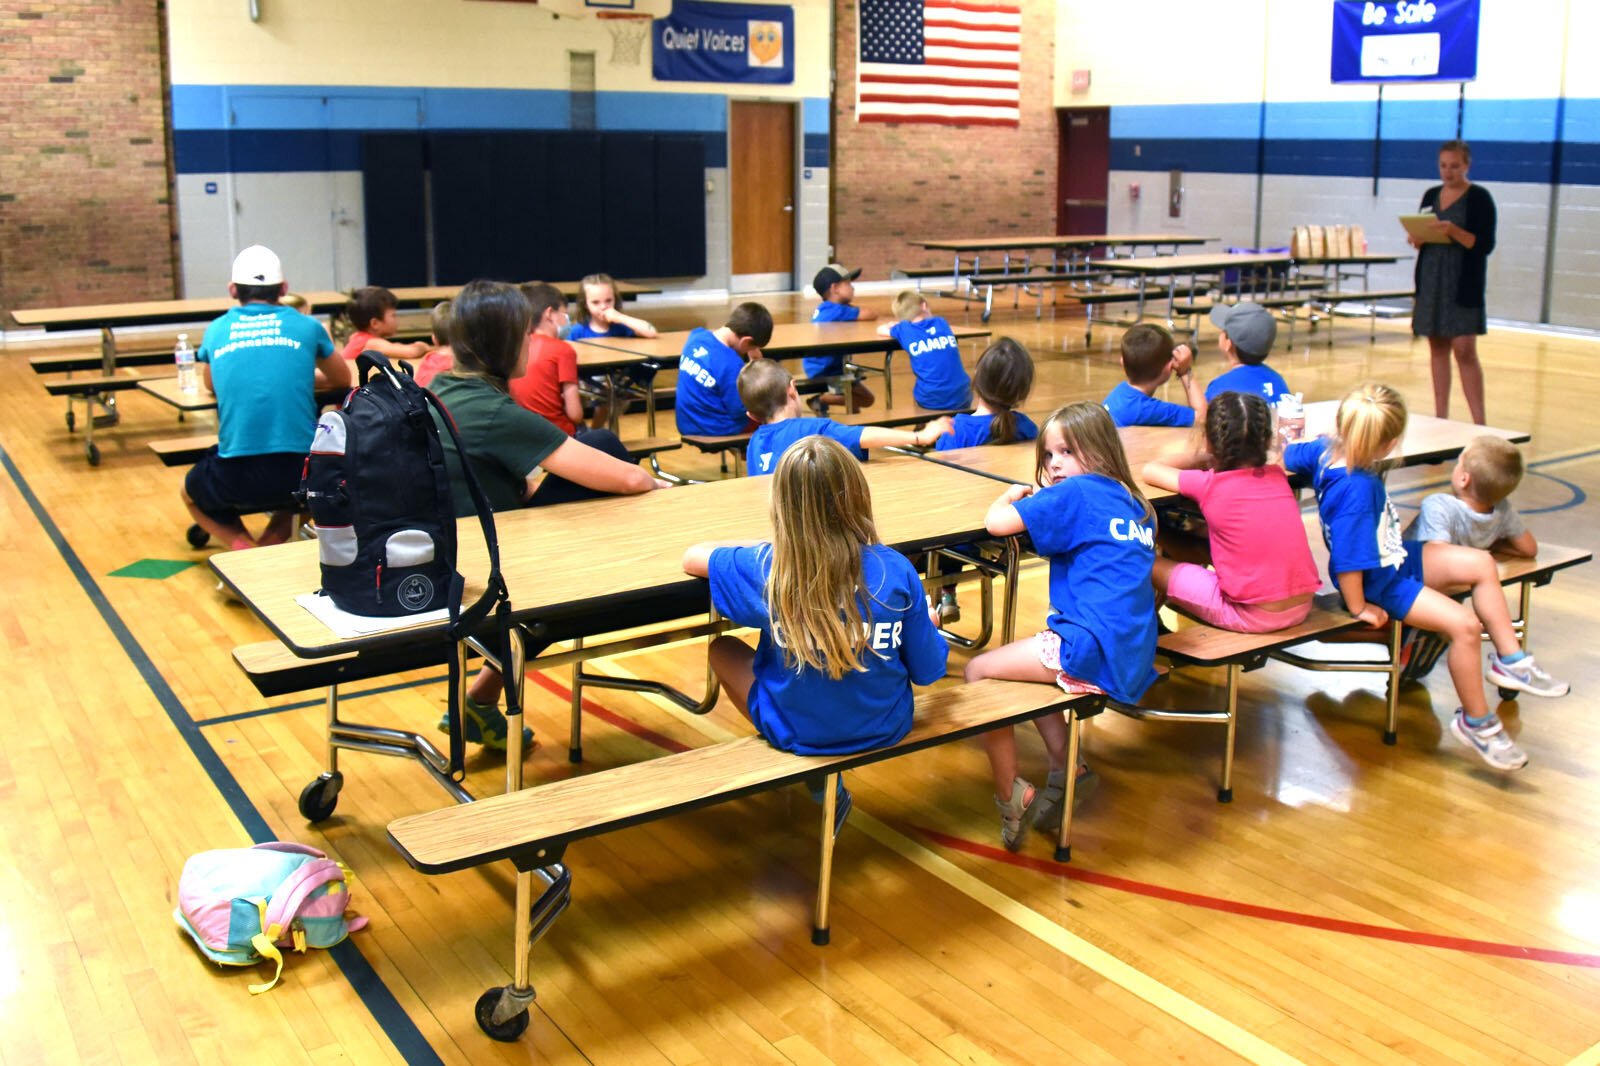 Campers at the YMCA summer day camp at Petoskey's Ottawa Elementary School snack on their formerly mystery fruits and vegetables.